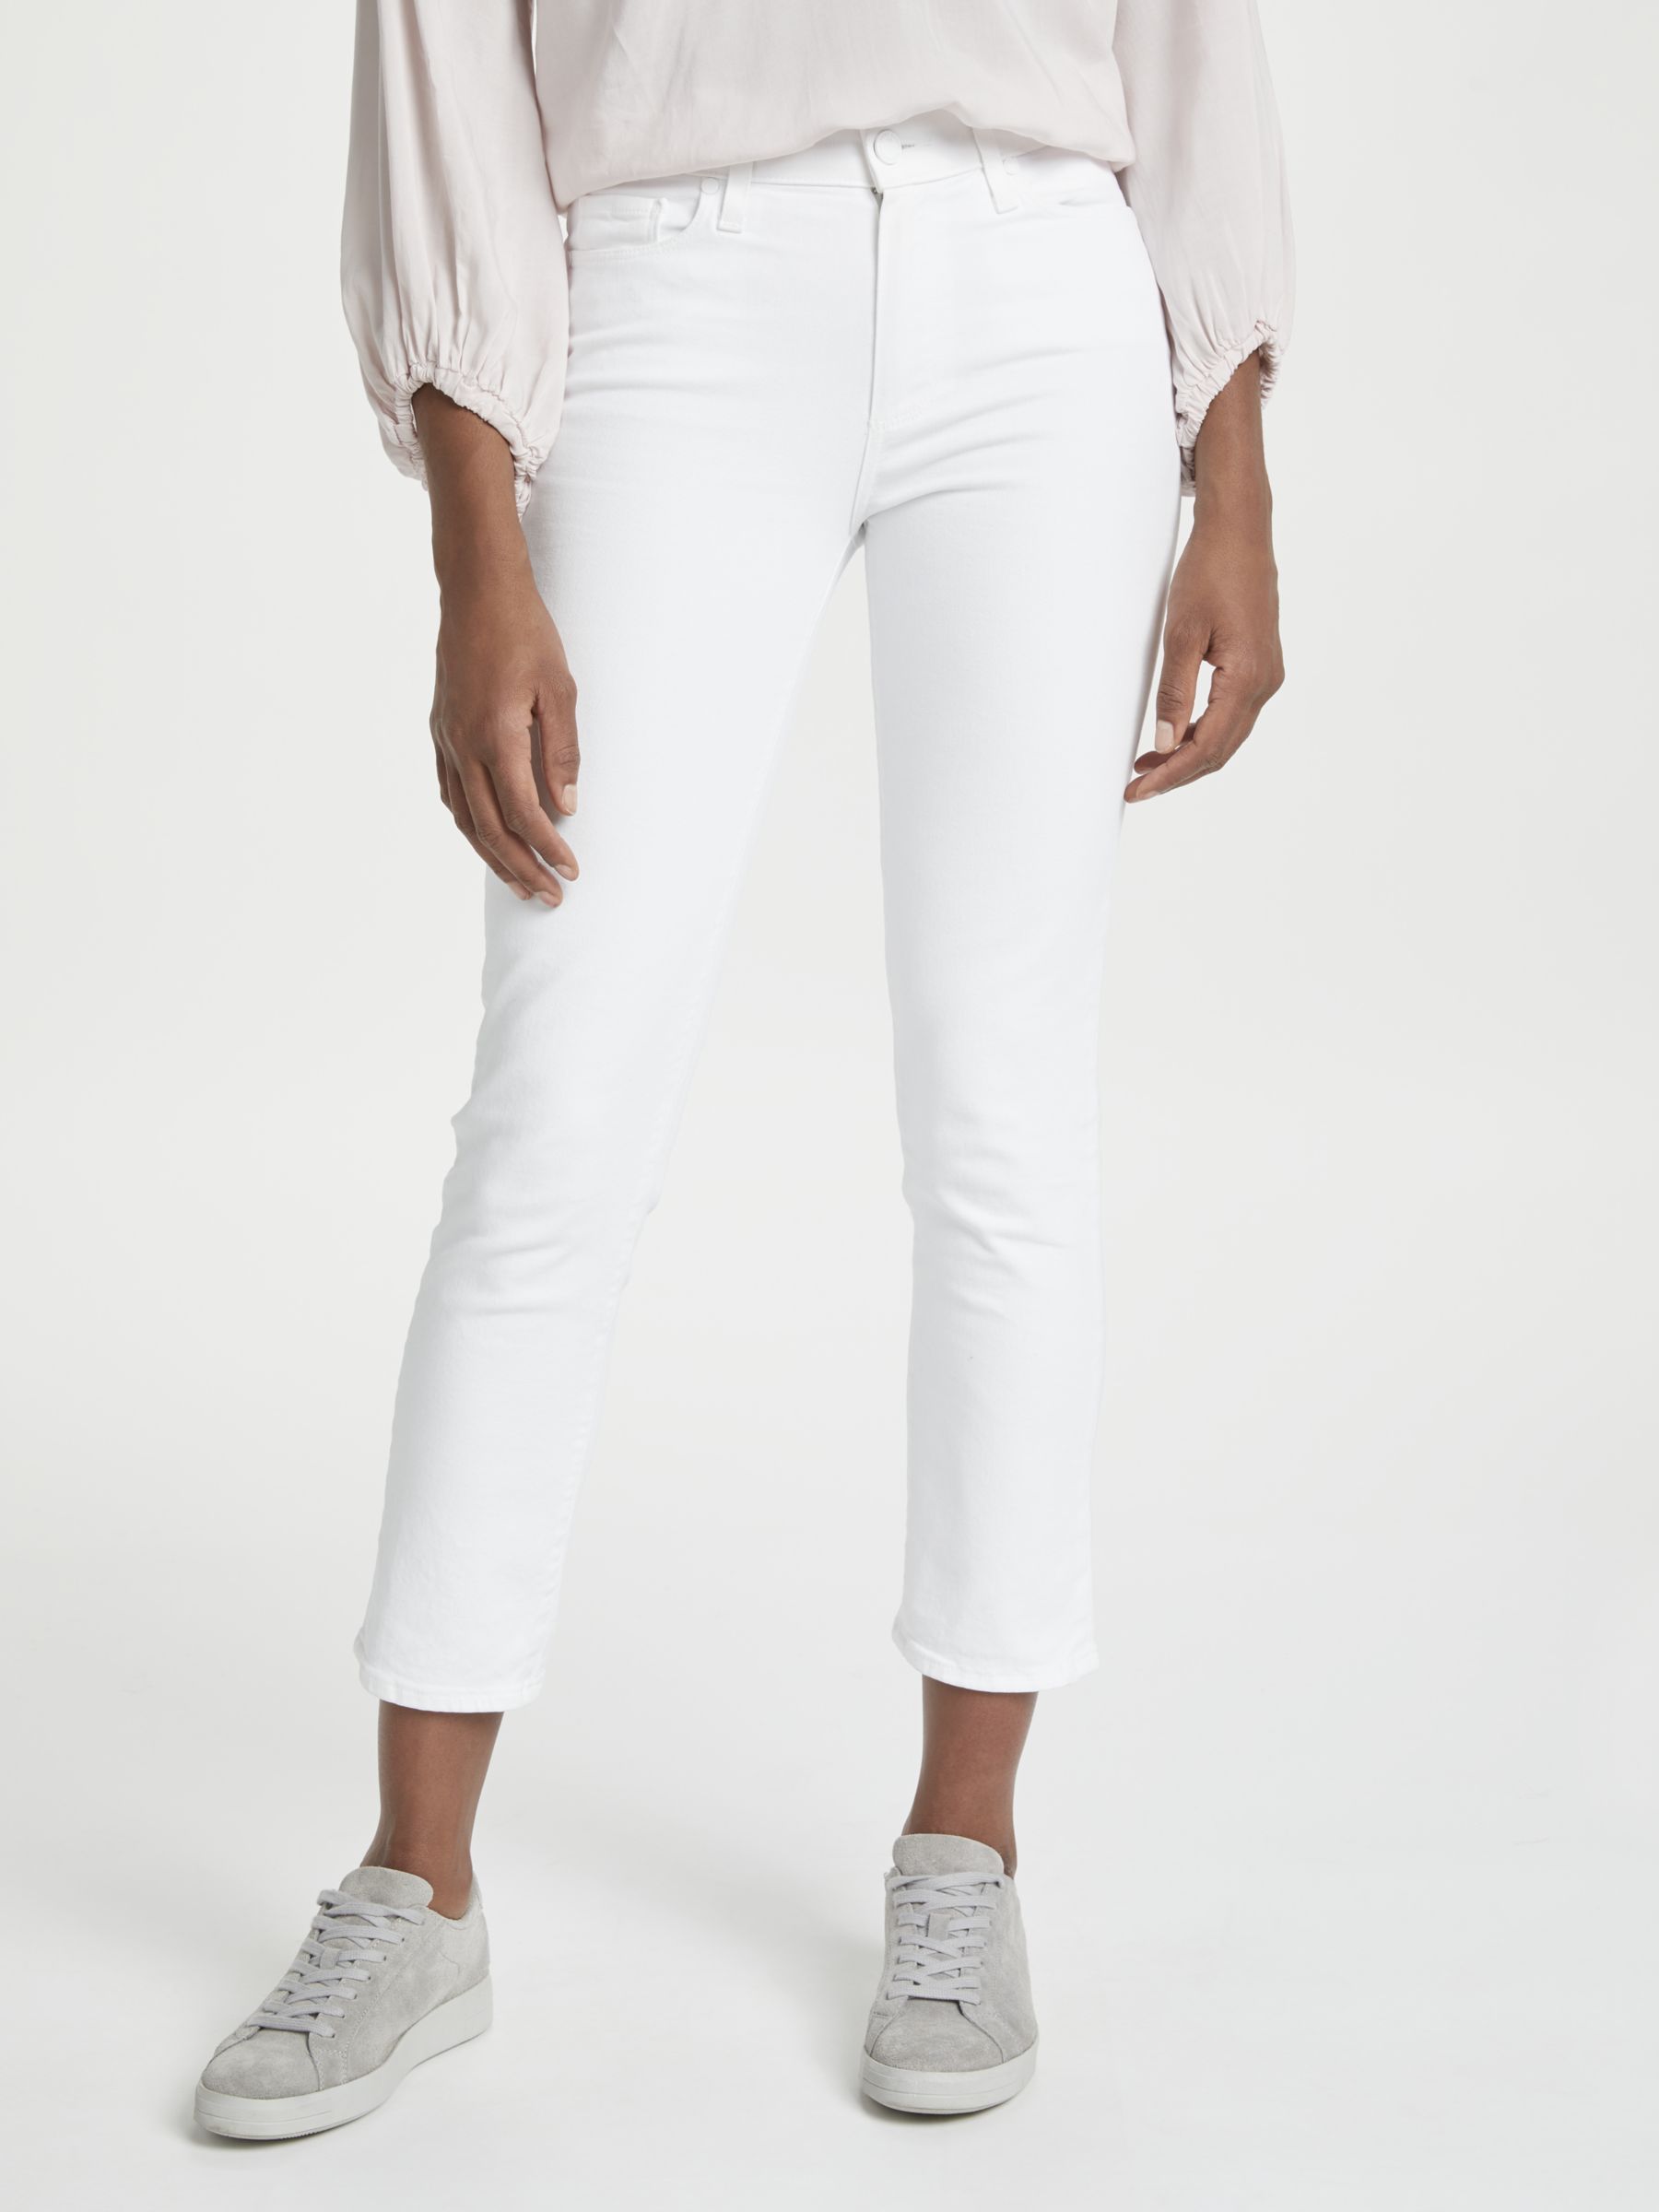 white jeans straight